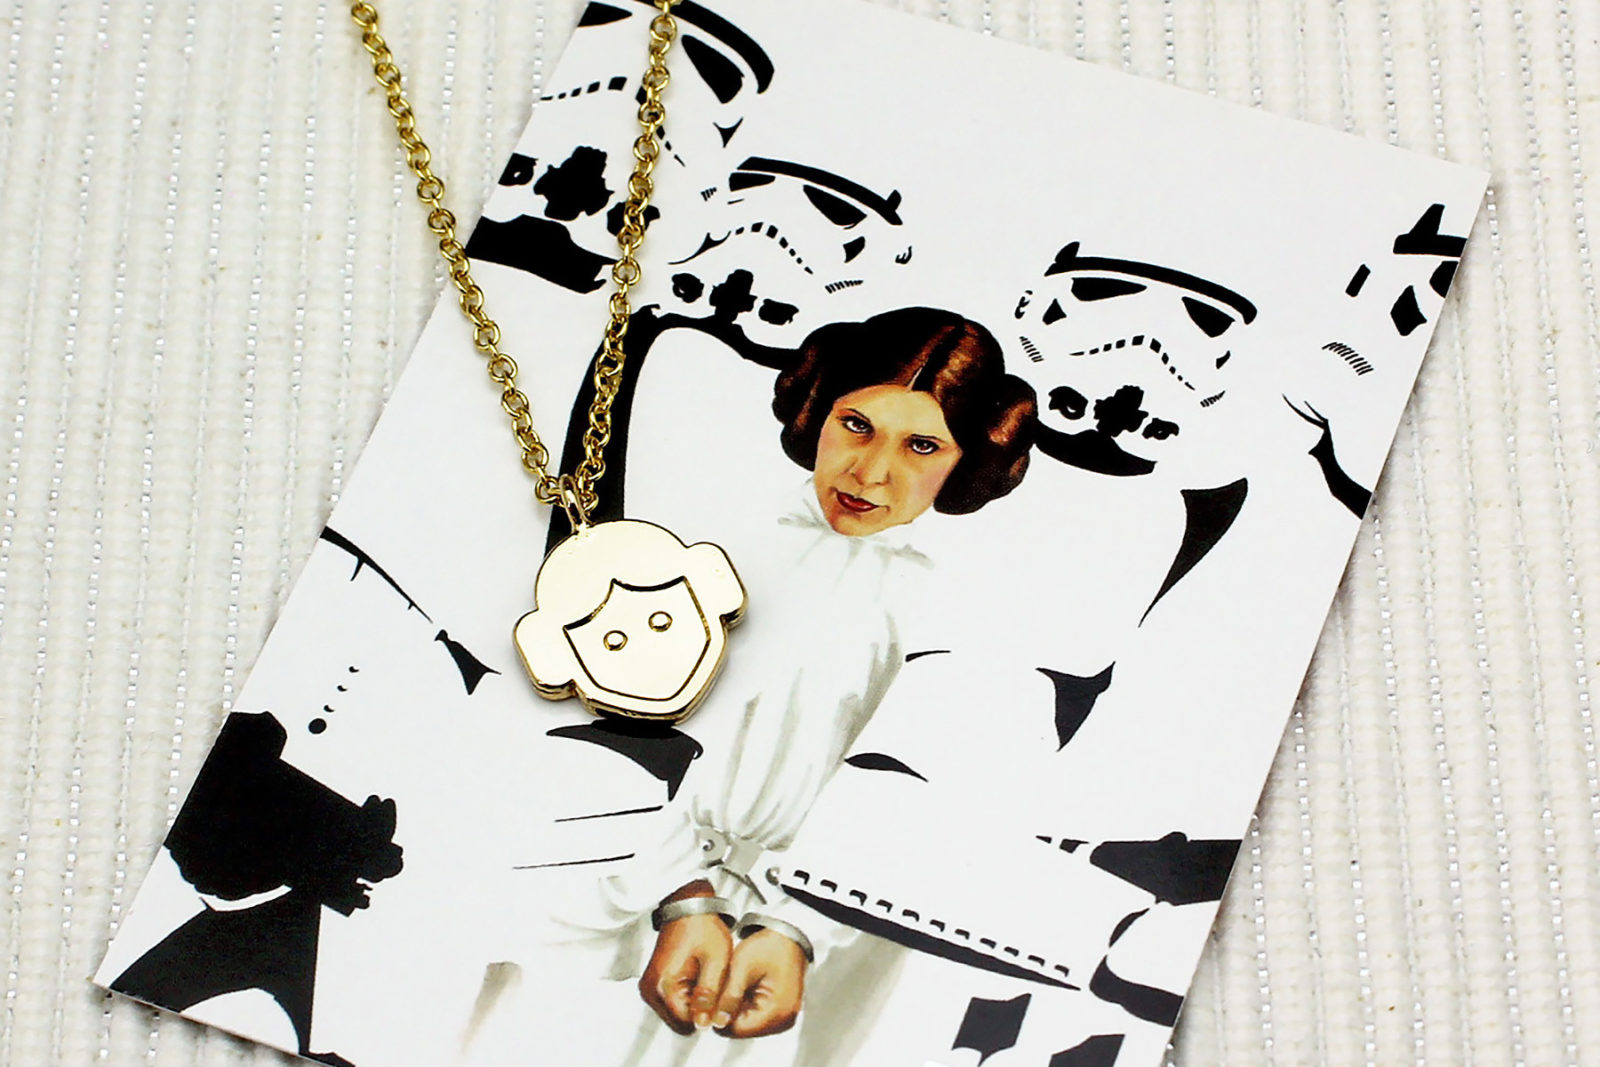 Love And Madness x Star Wars Princess Leia necklace